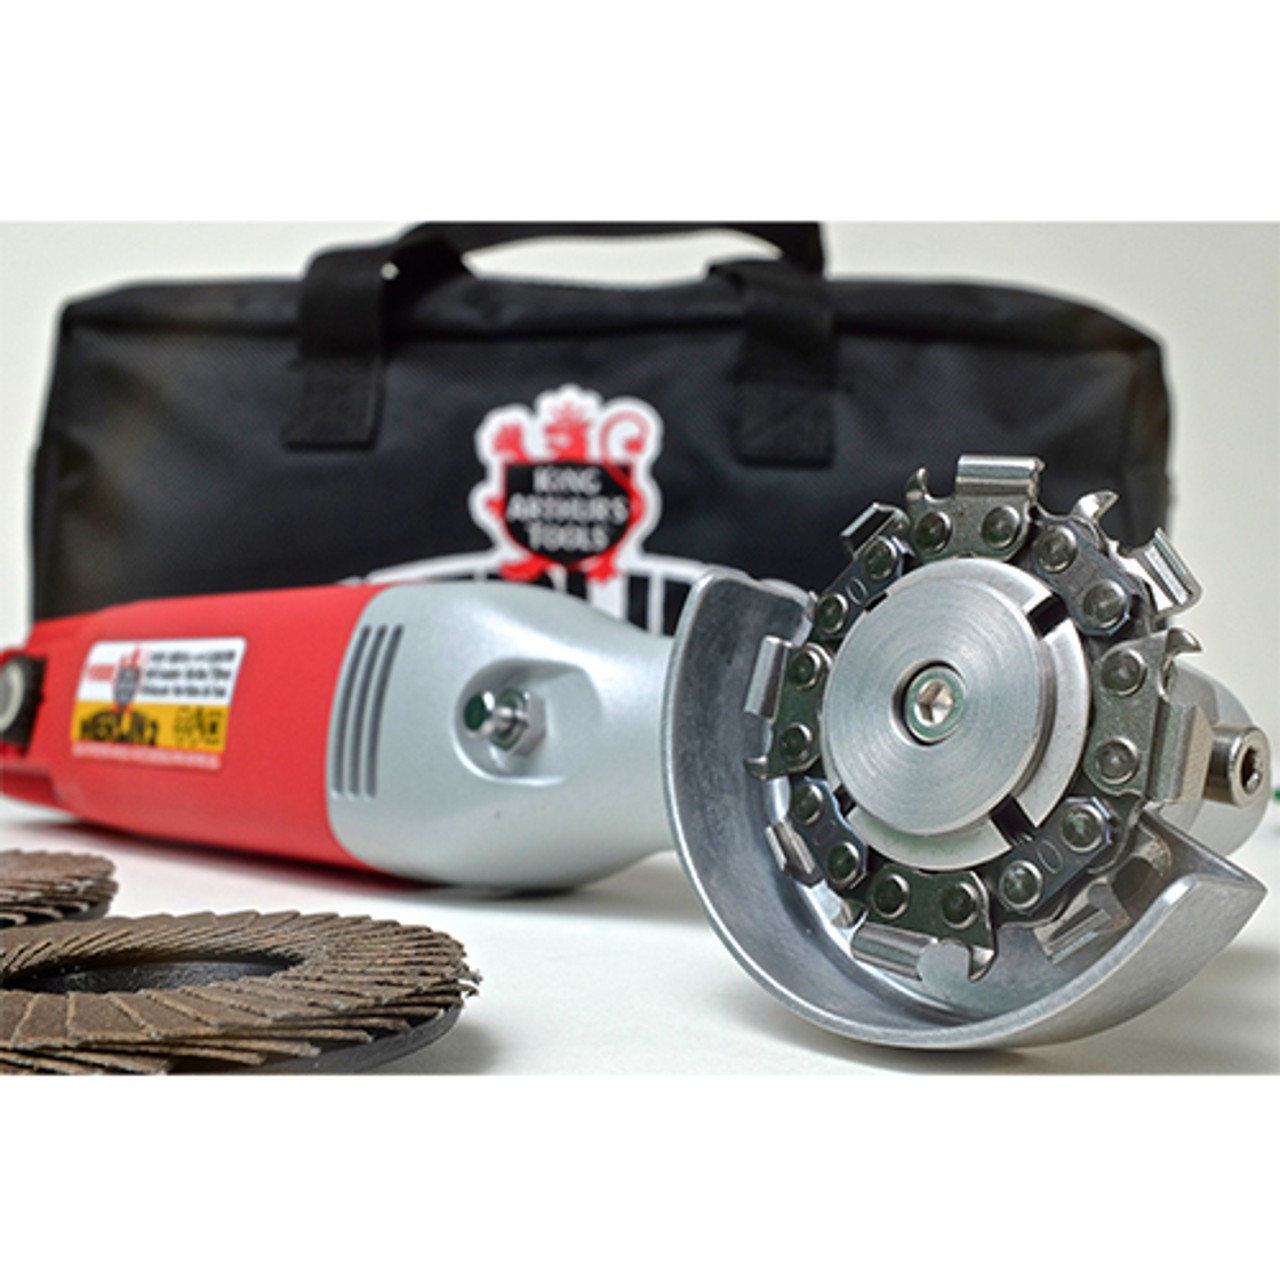 VARIABLE SPEED MINIATURE ANGLE GRINDER DELUXE SET